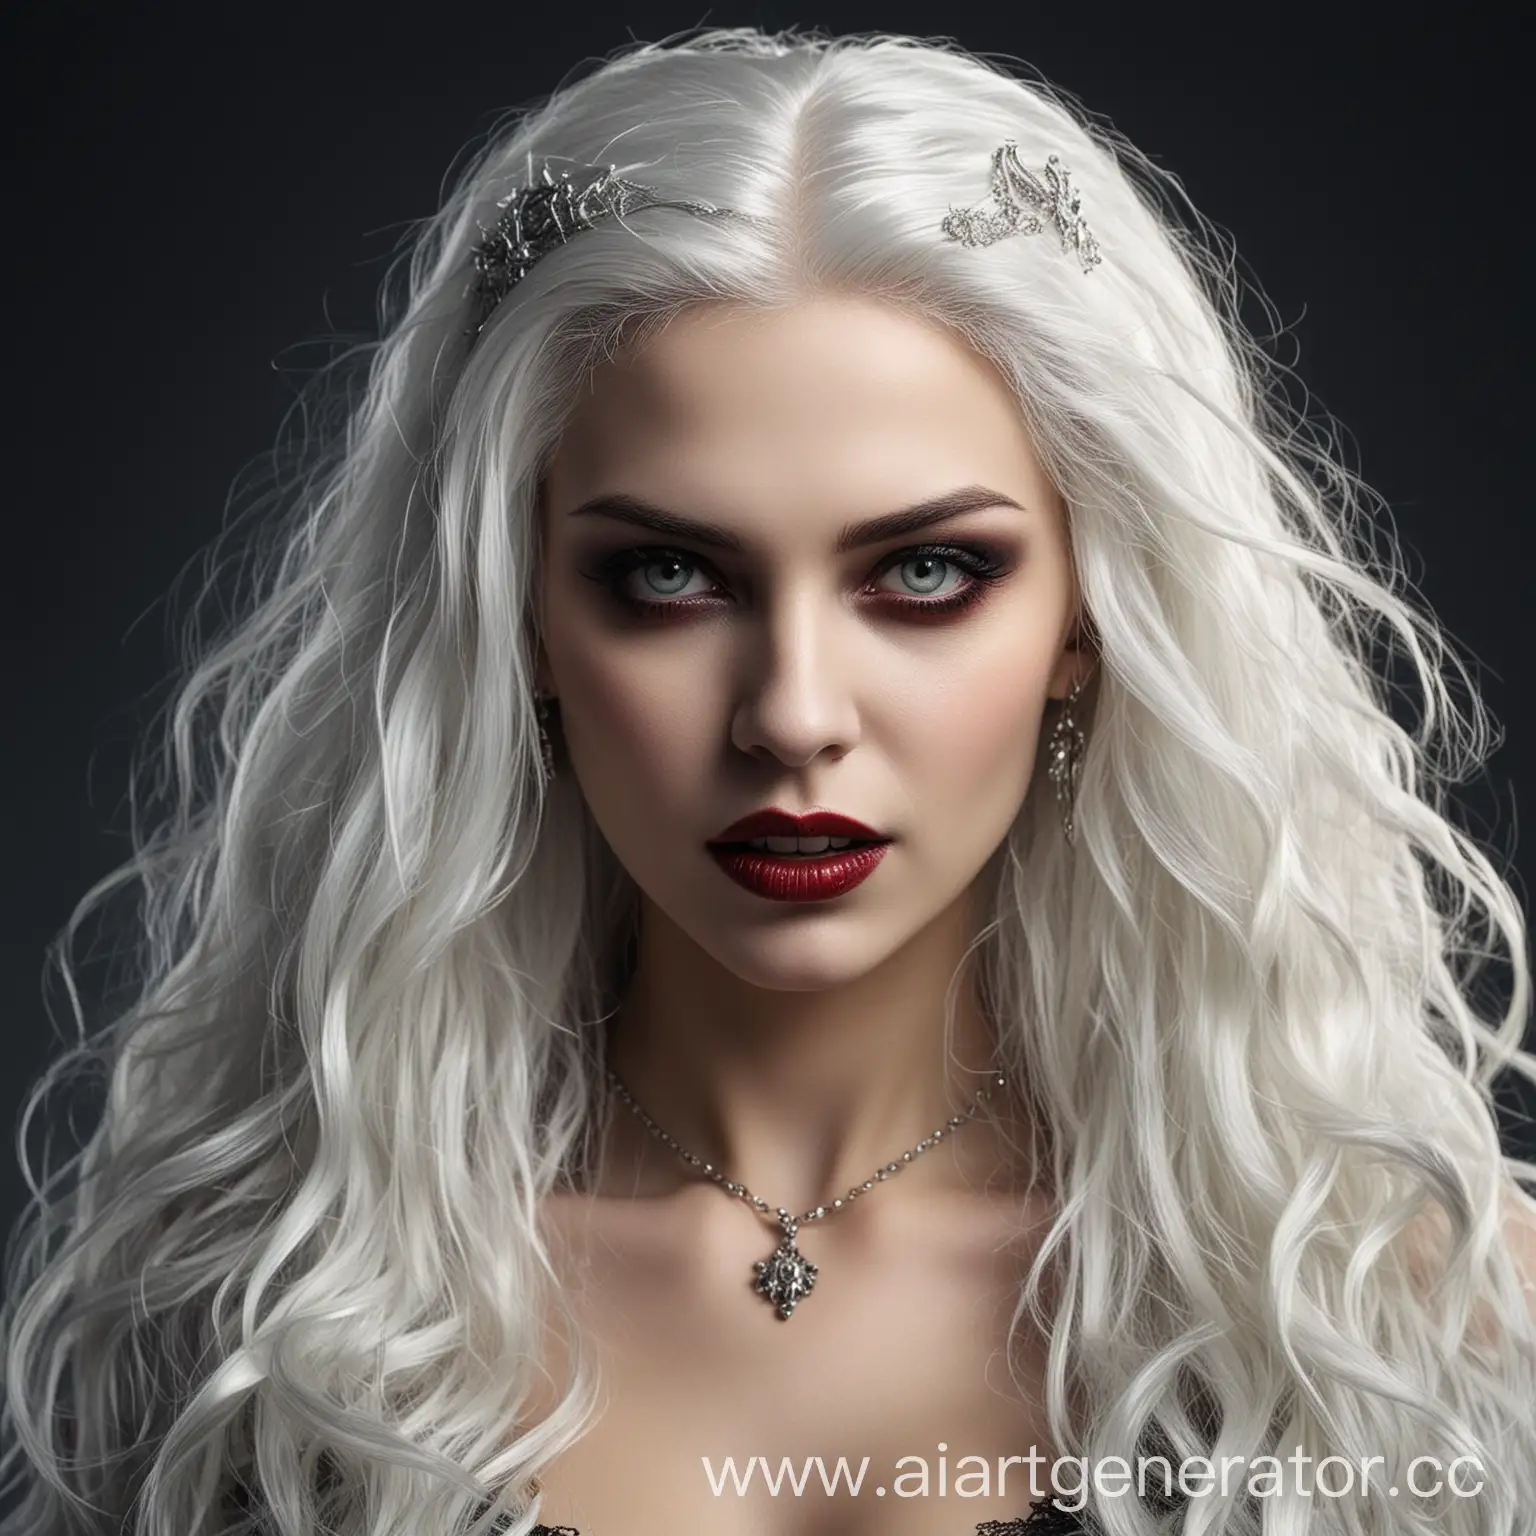 Ethereal-Vampire-Woman-with-Flowing-White-Hair